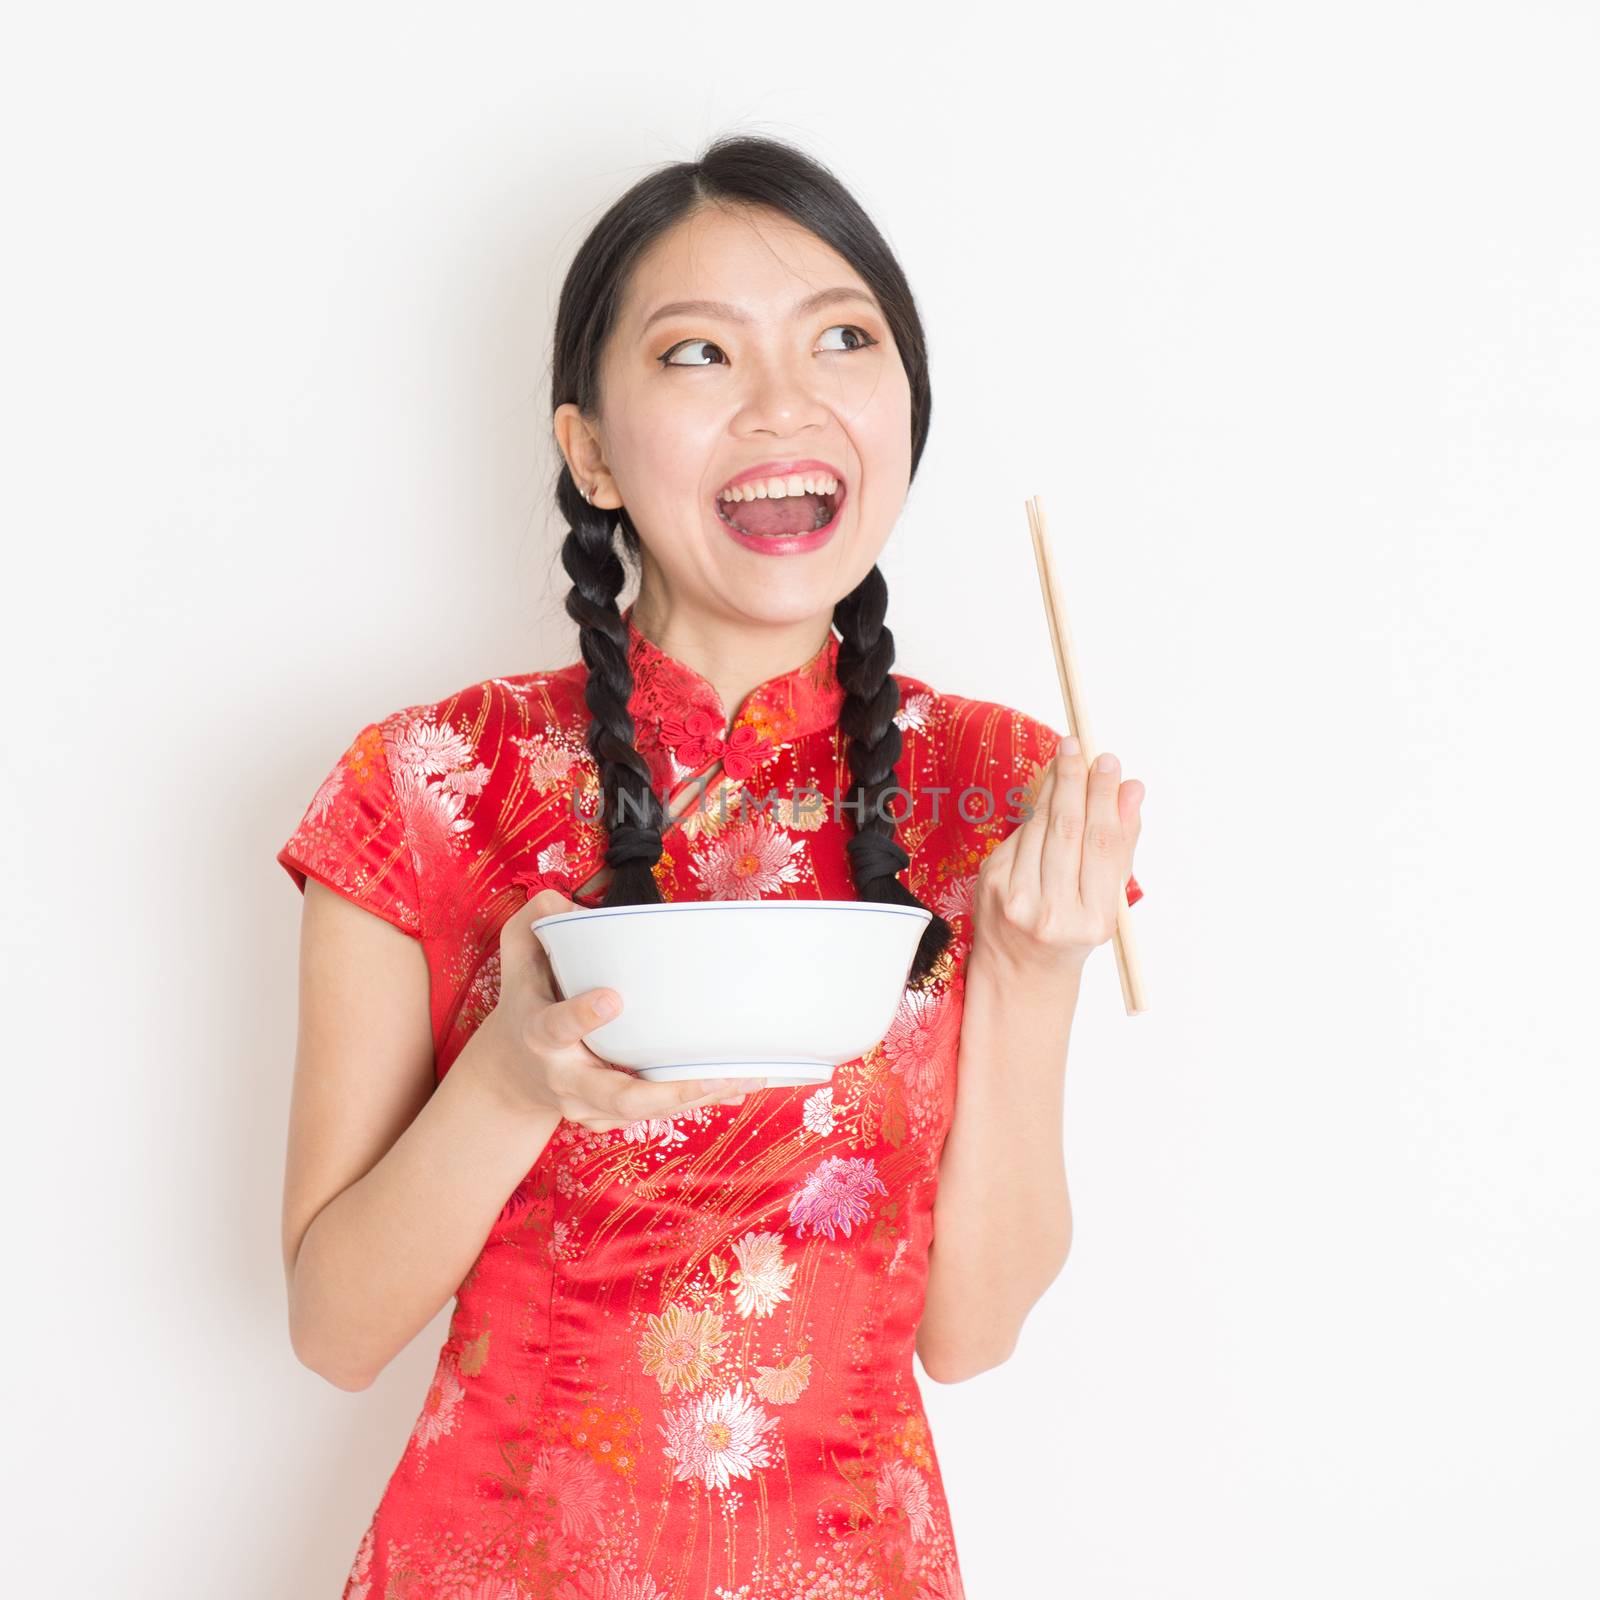 Portrait of young Asian woman in traditional cheongsam dress eating, hand holding bowl and chopsticks, celebrating Chinese Lunar New Year or spring festival, standing on plain background.